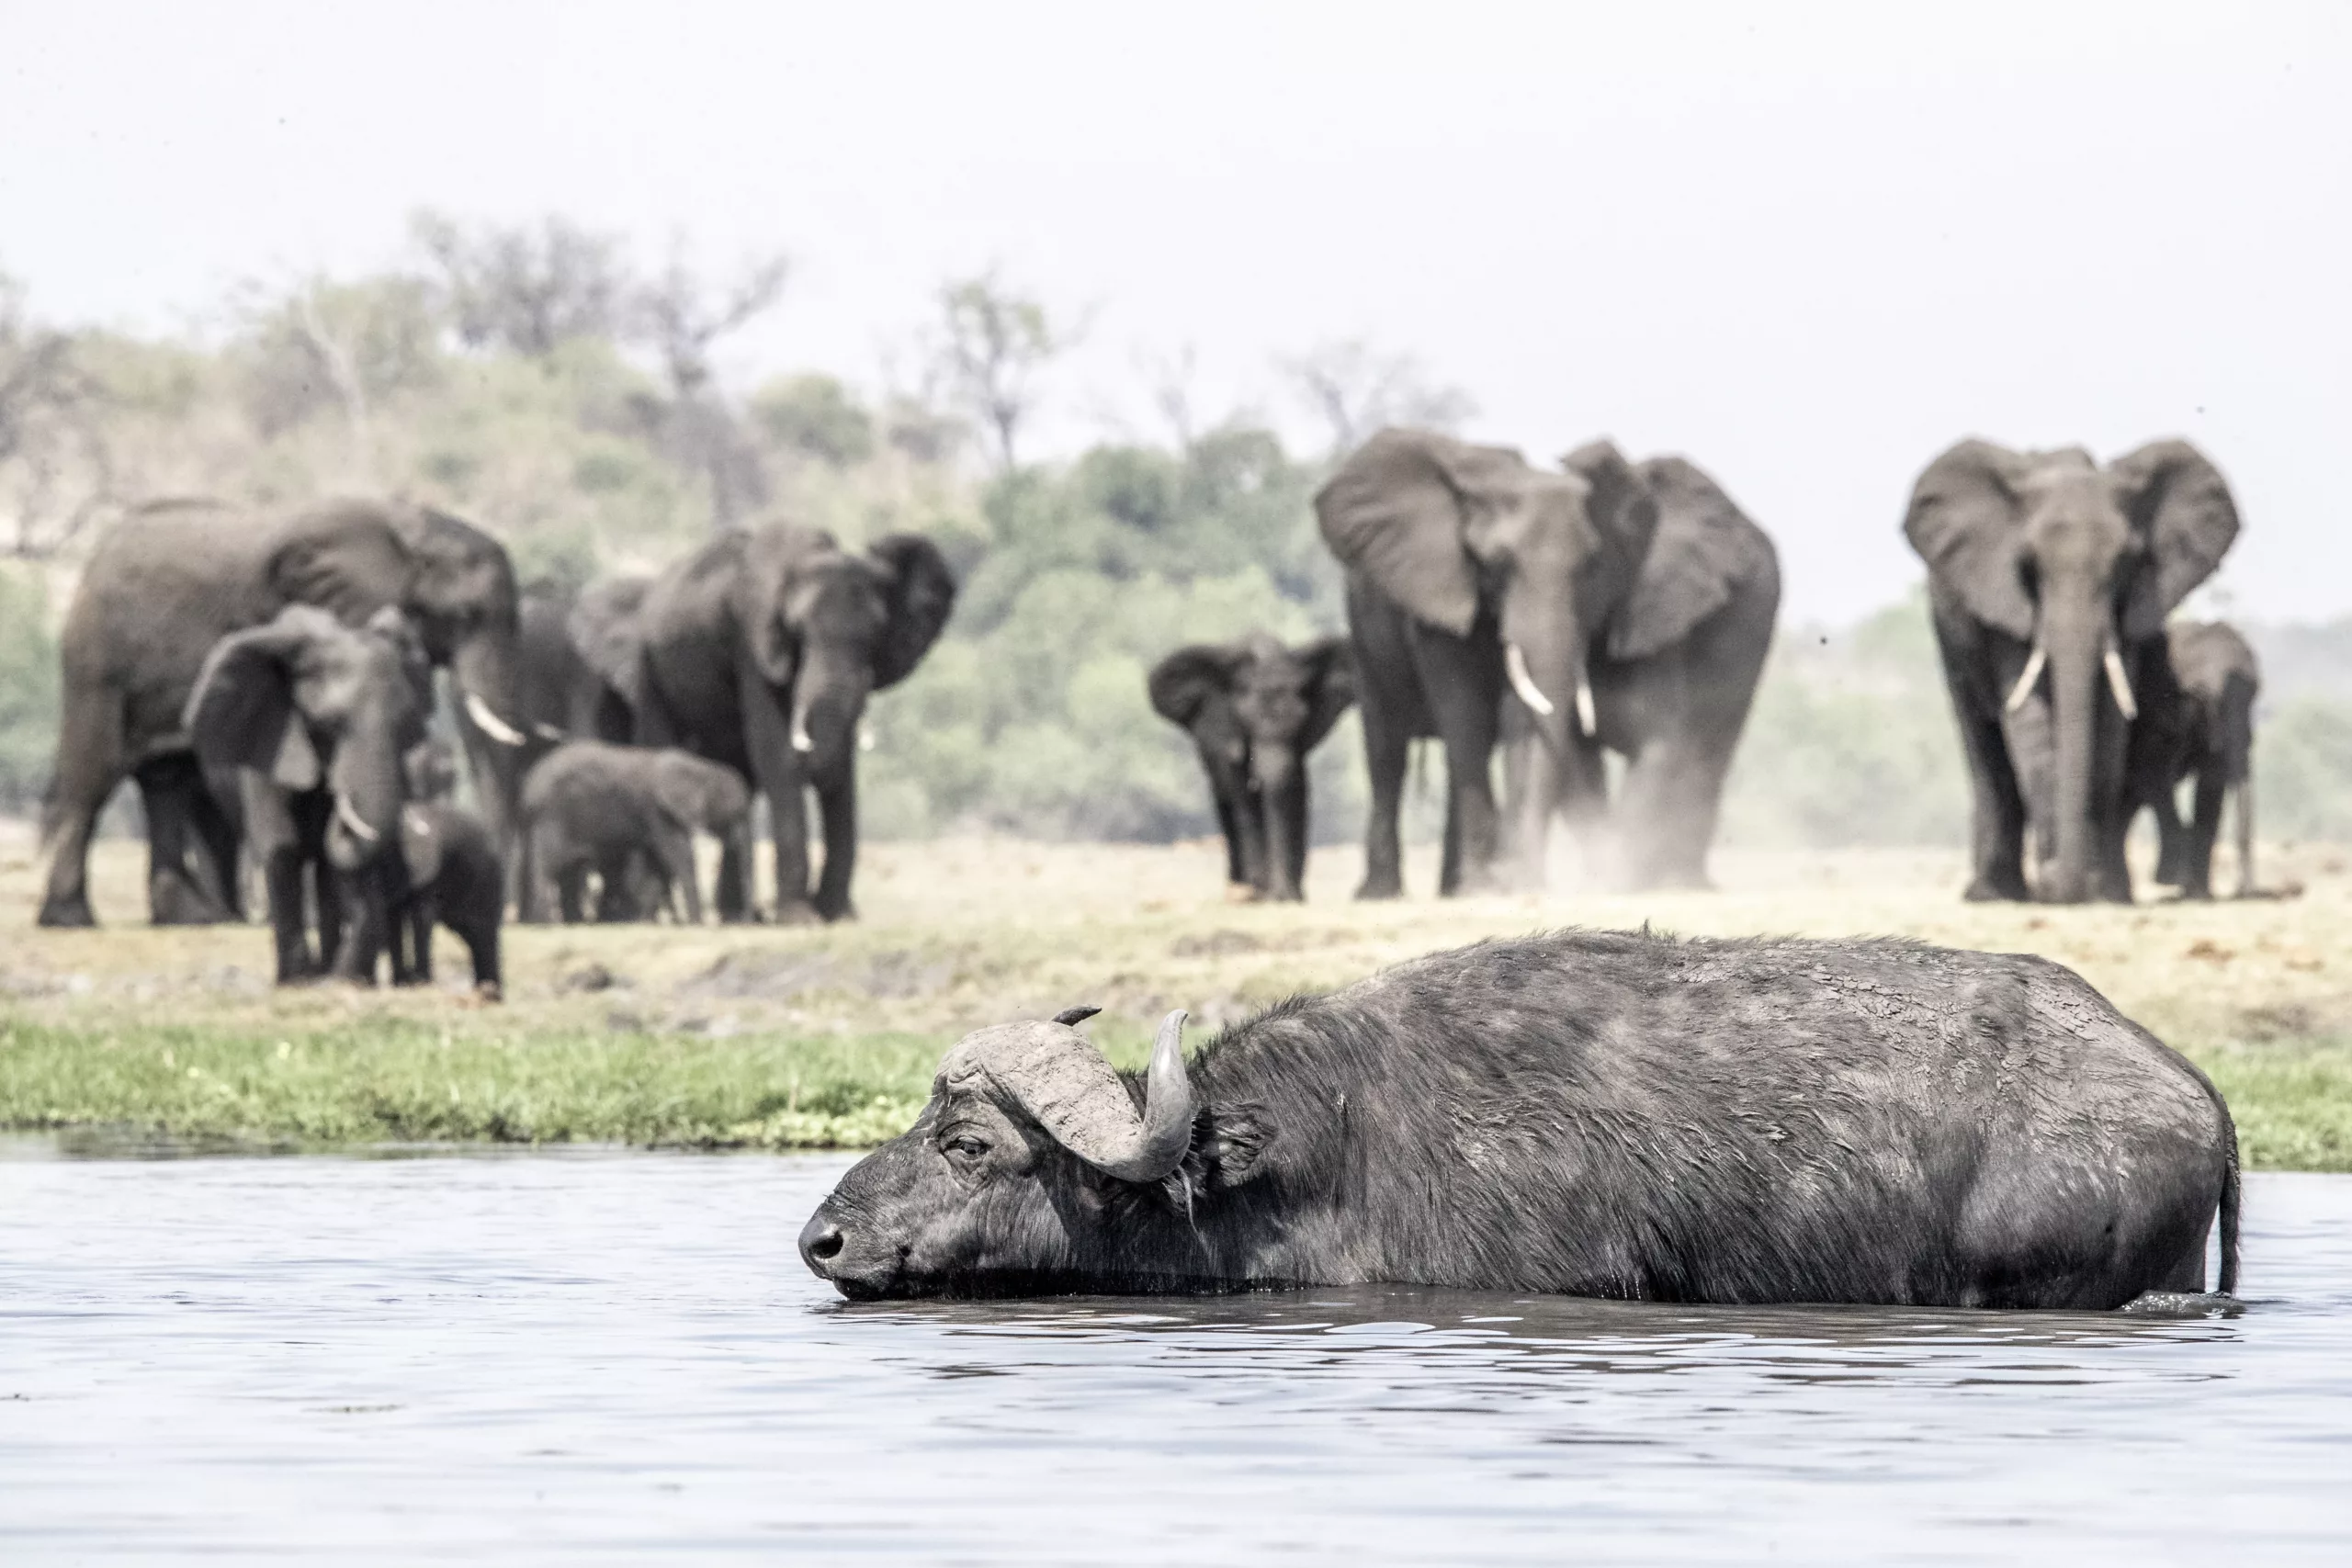 The elephant and the buffalo in Chobe by Janine Krayer